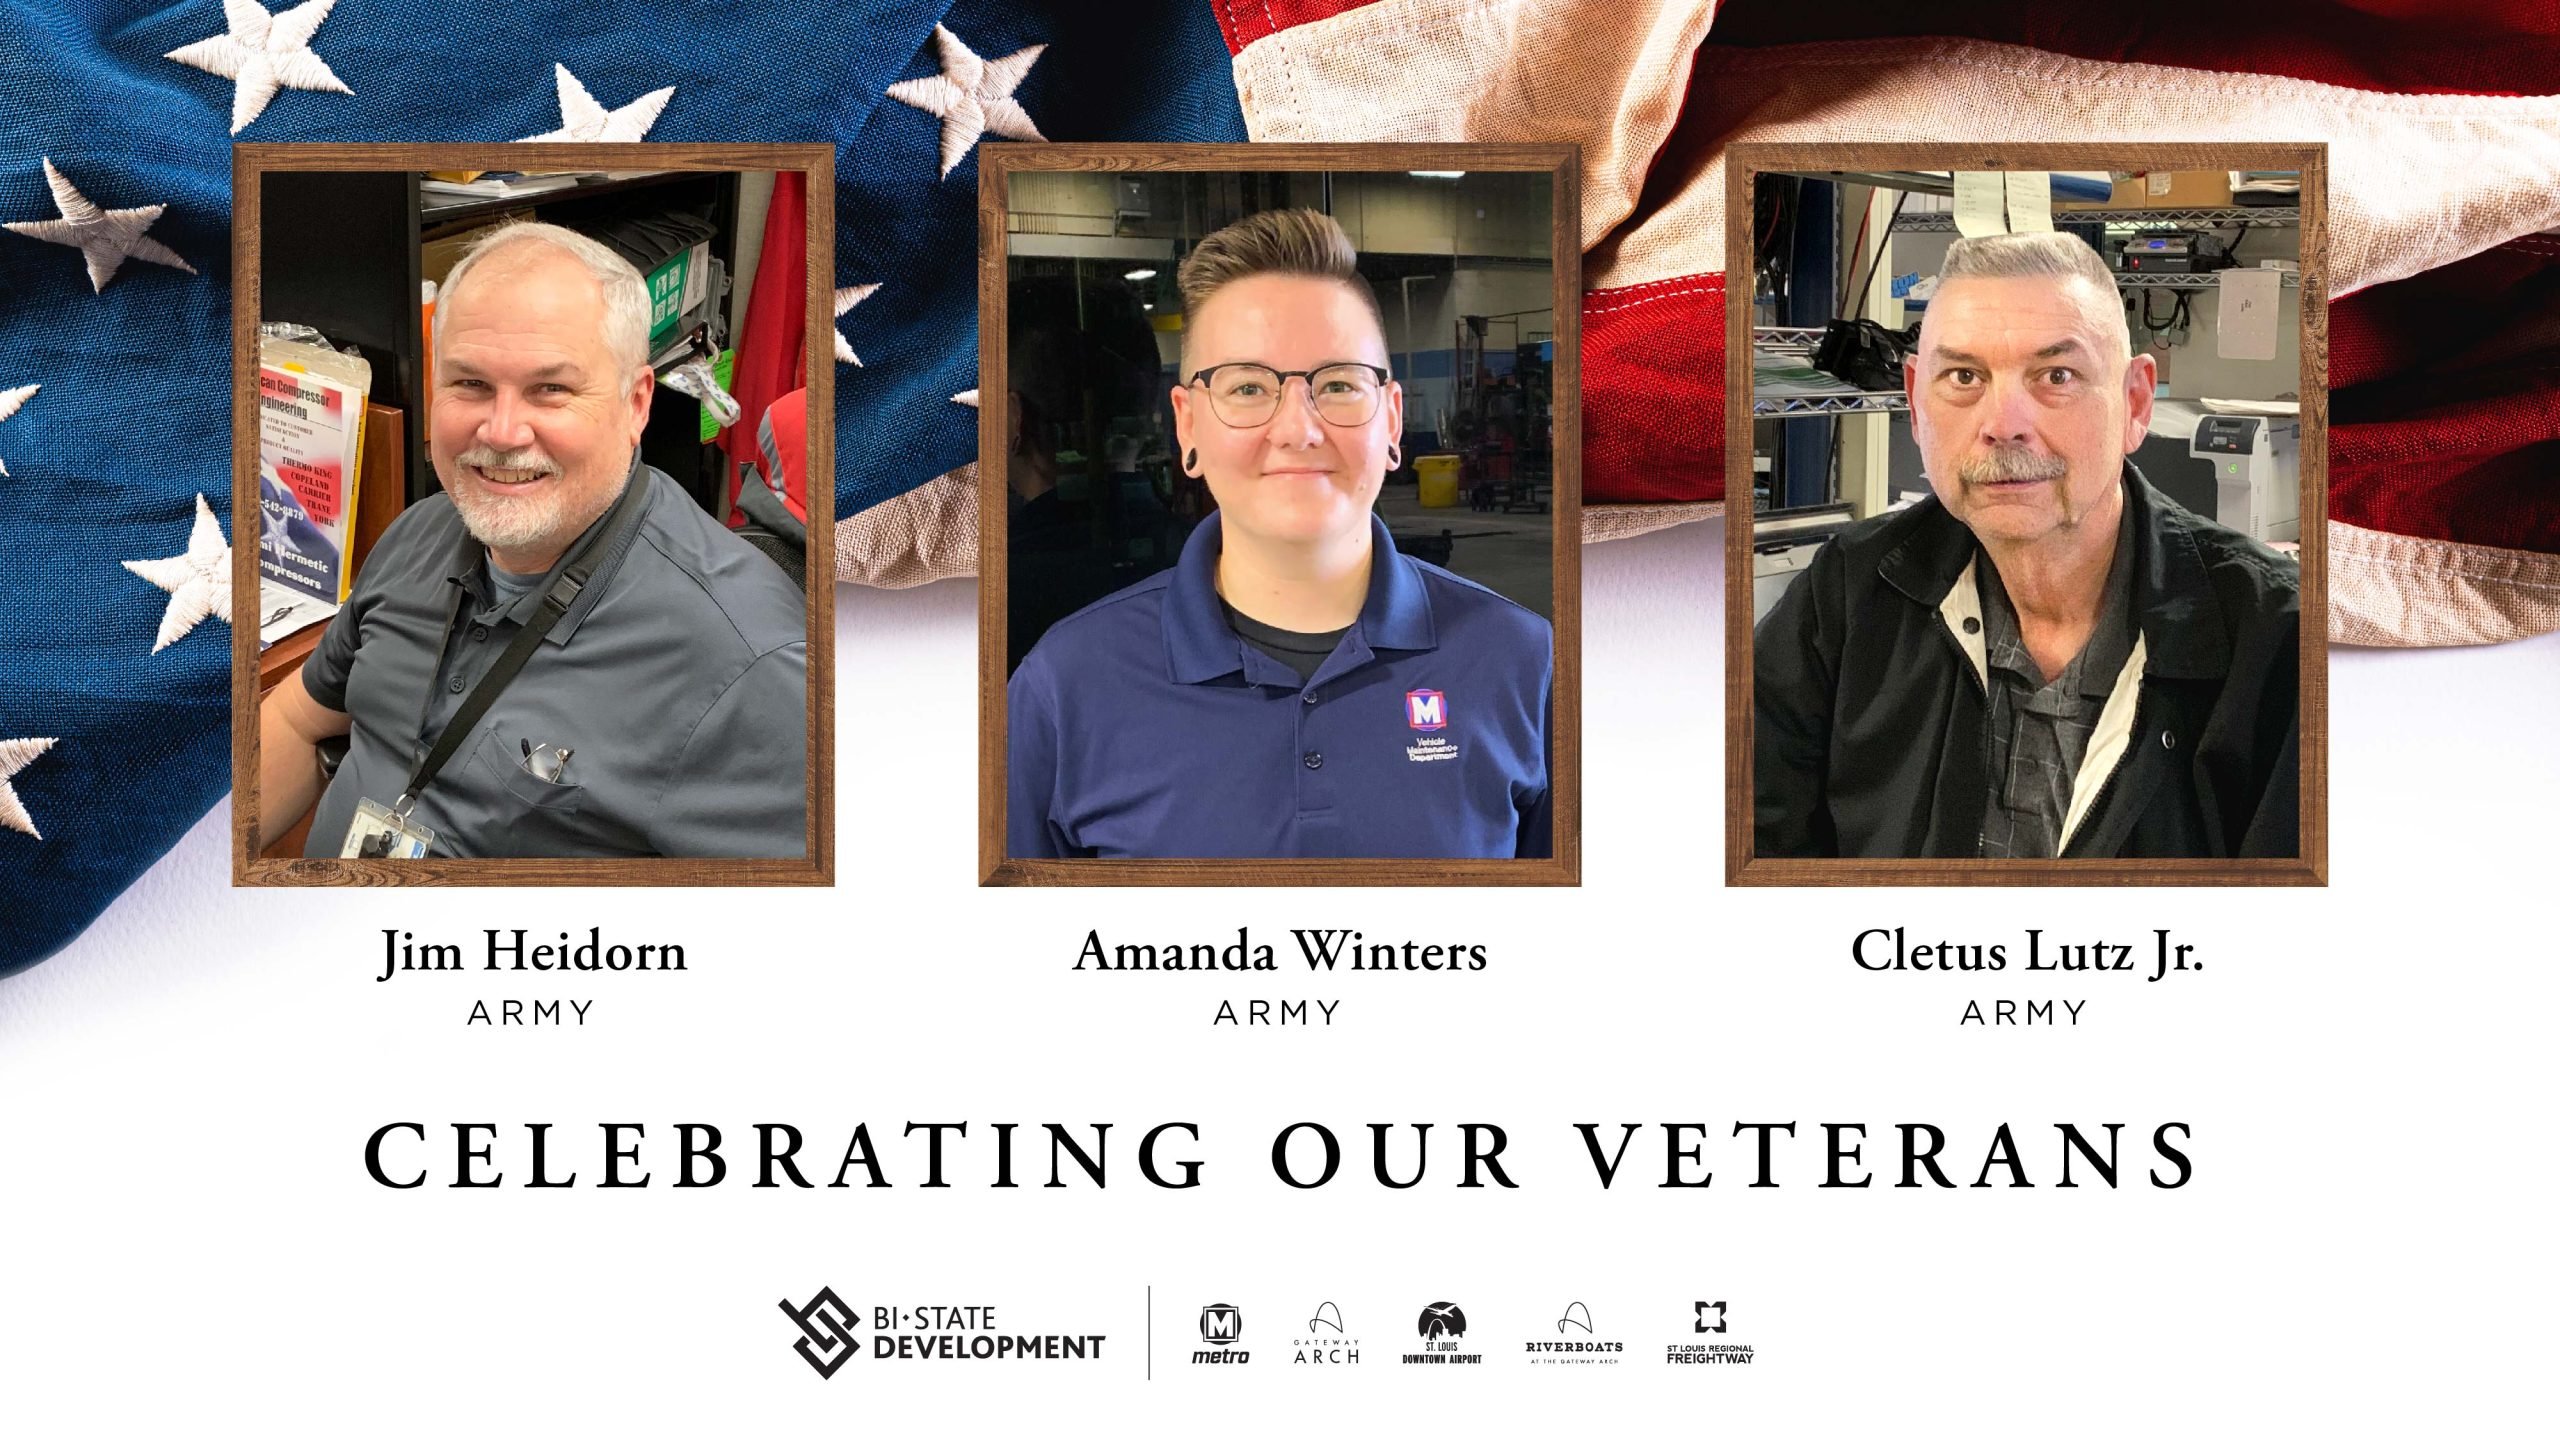 A Celebrating Our Veterans graphic that features three Army Veterans: Jim Heidorn, Amanda Winters, and Cletus Lutz Jr.